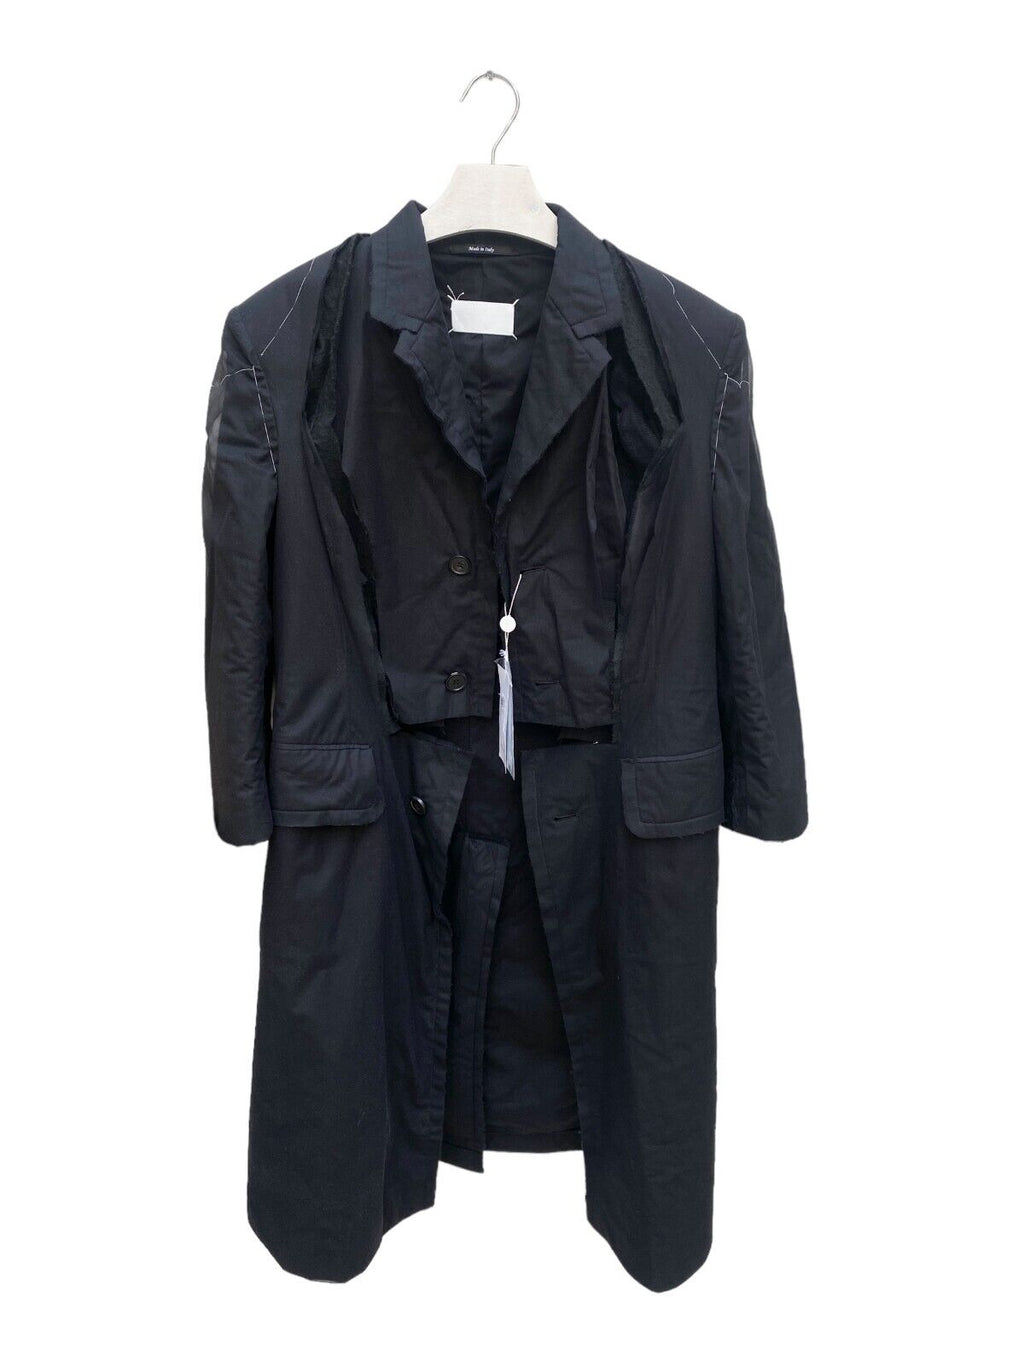 Runway SS 2021  Oversized Black Cut Out Deconstructed Coat